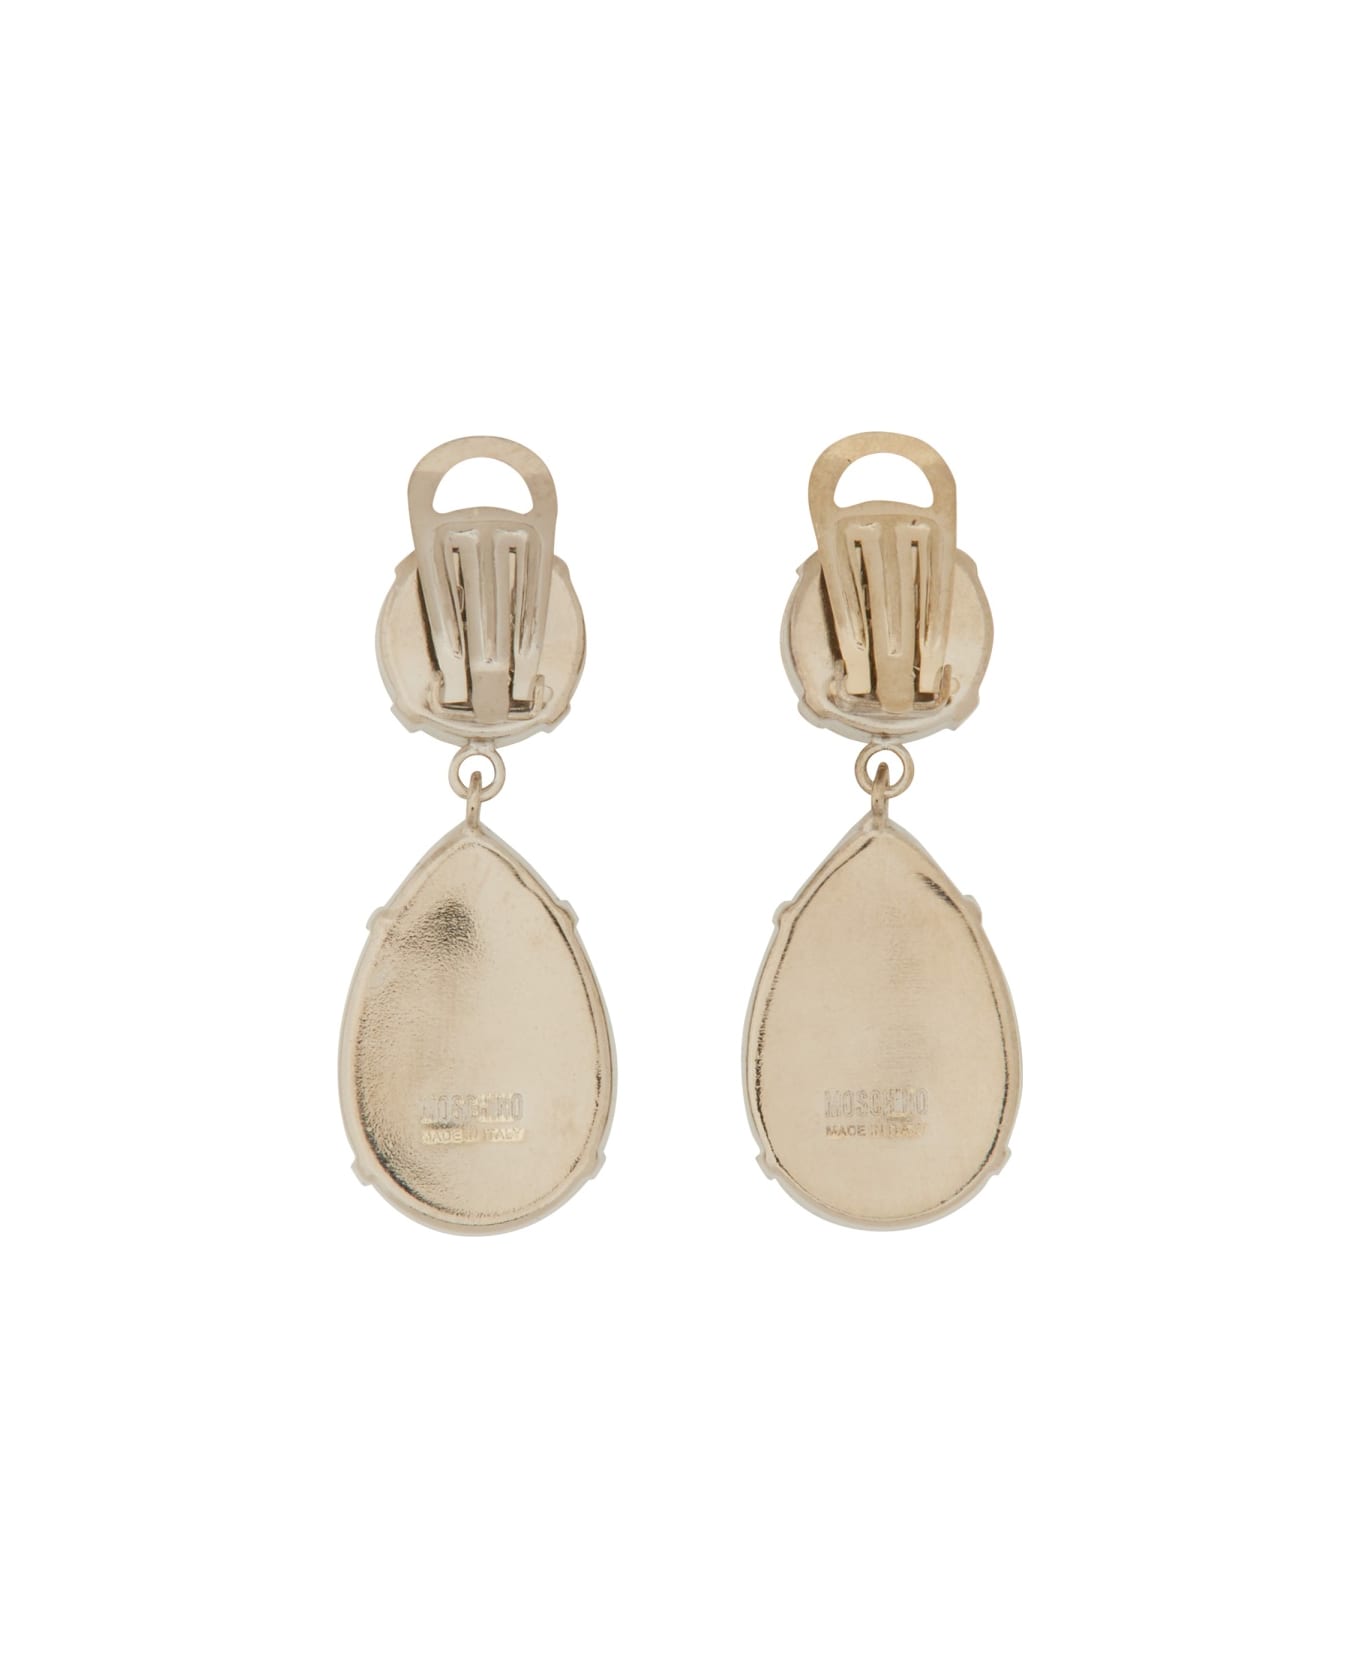 Moschino Pendant Earrings With Jewel Stones - SILVER イヤリング